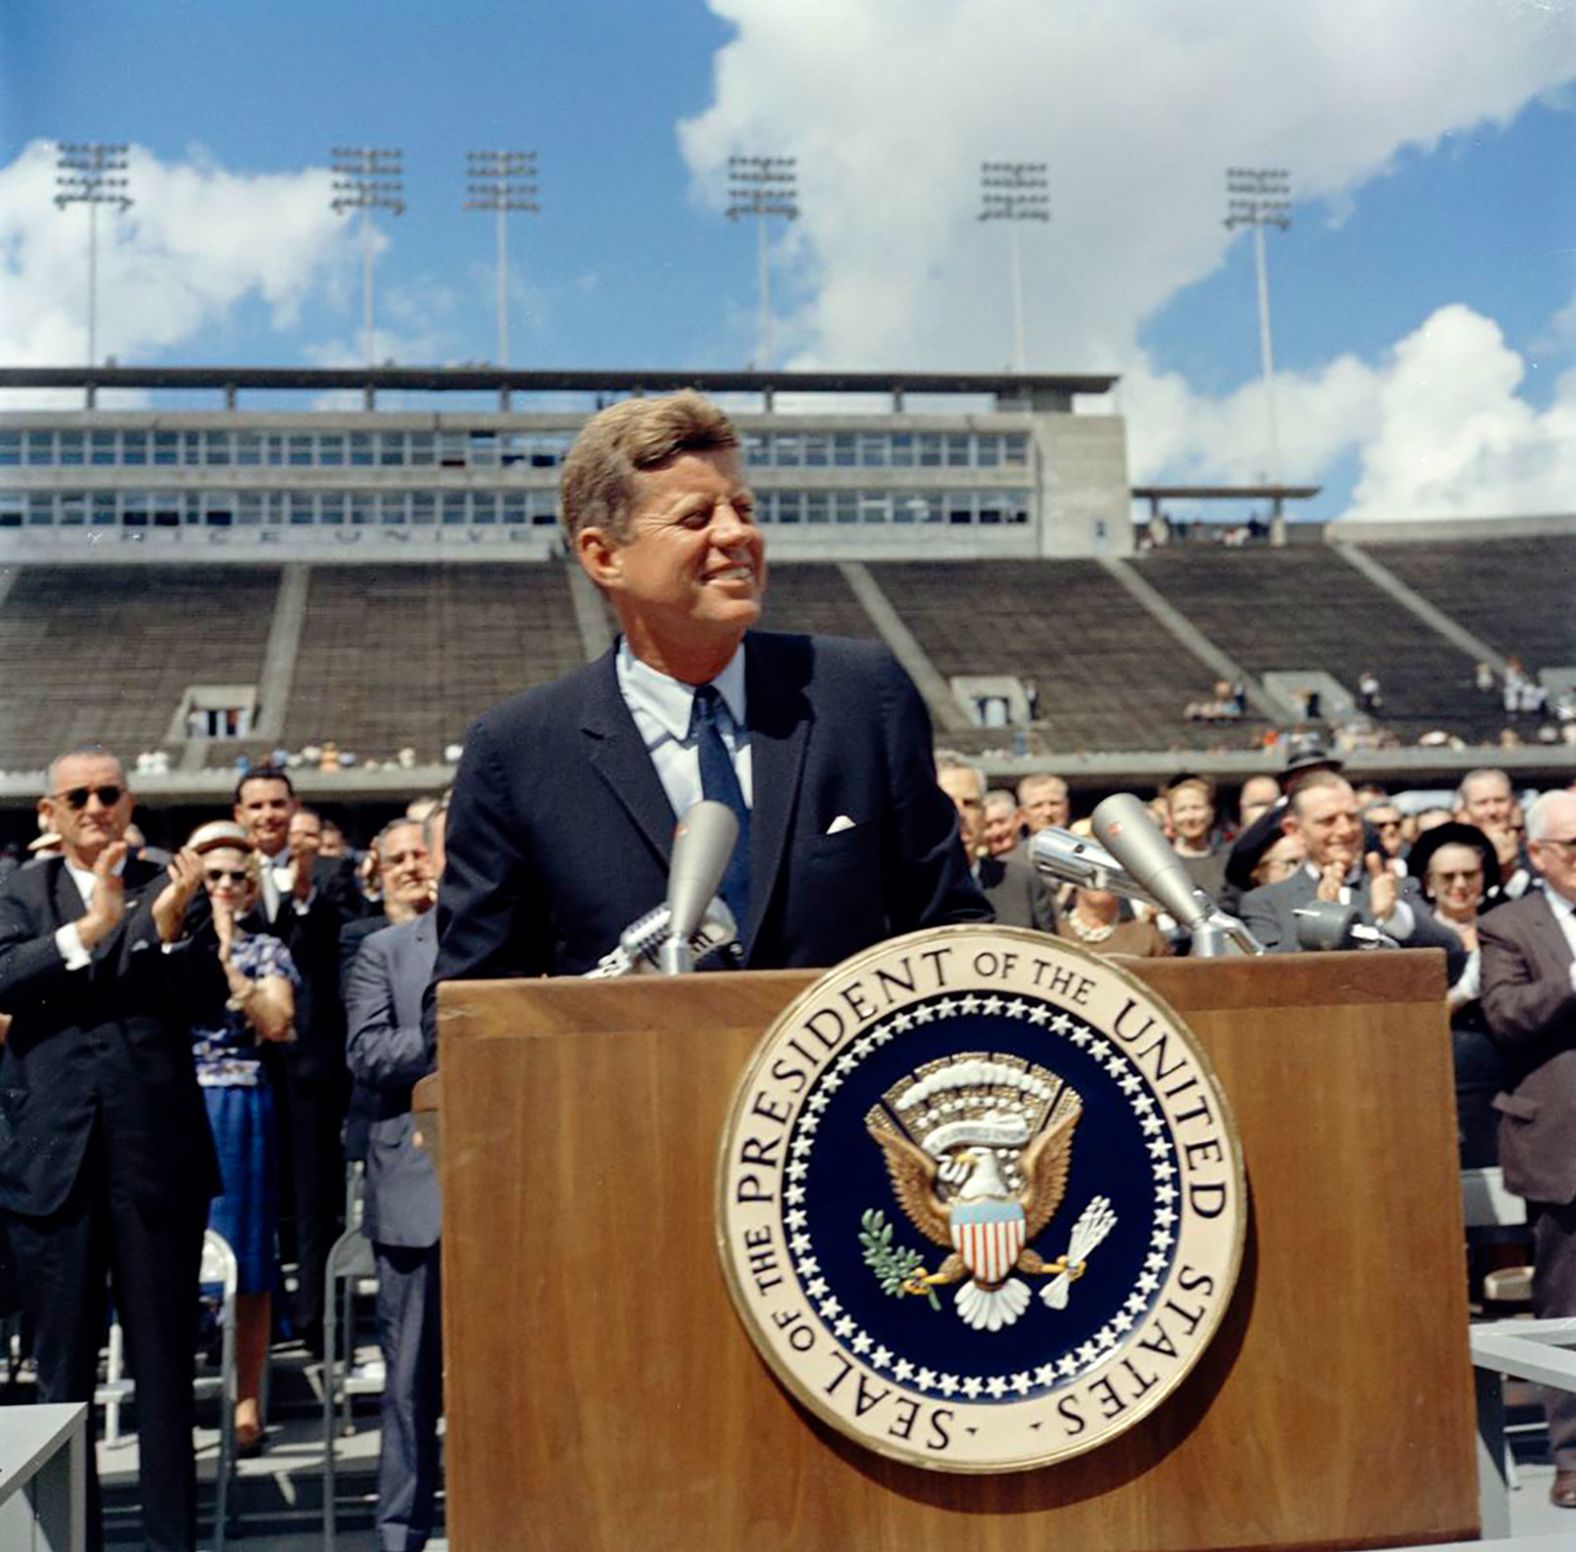 Kennedy delivers remarks at Rice University in Houston in September 1962. Talking about the nation's efforts in space exploration, Kennedy famously said, "We choose to go to the moon in this decade and do the other things, not because they are easy, but because they are hard."